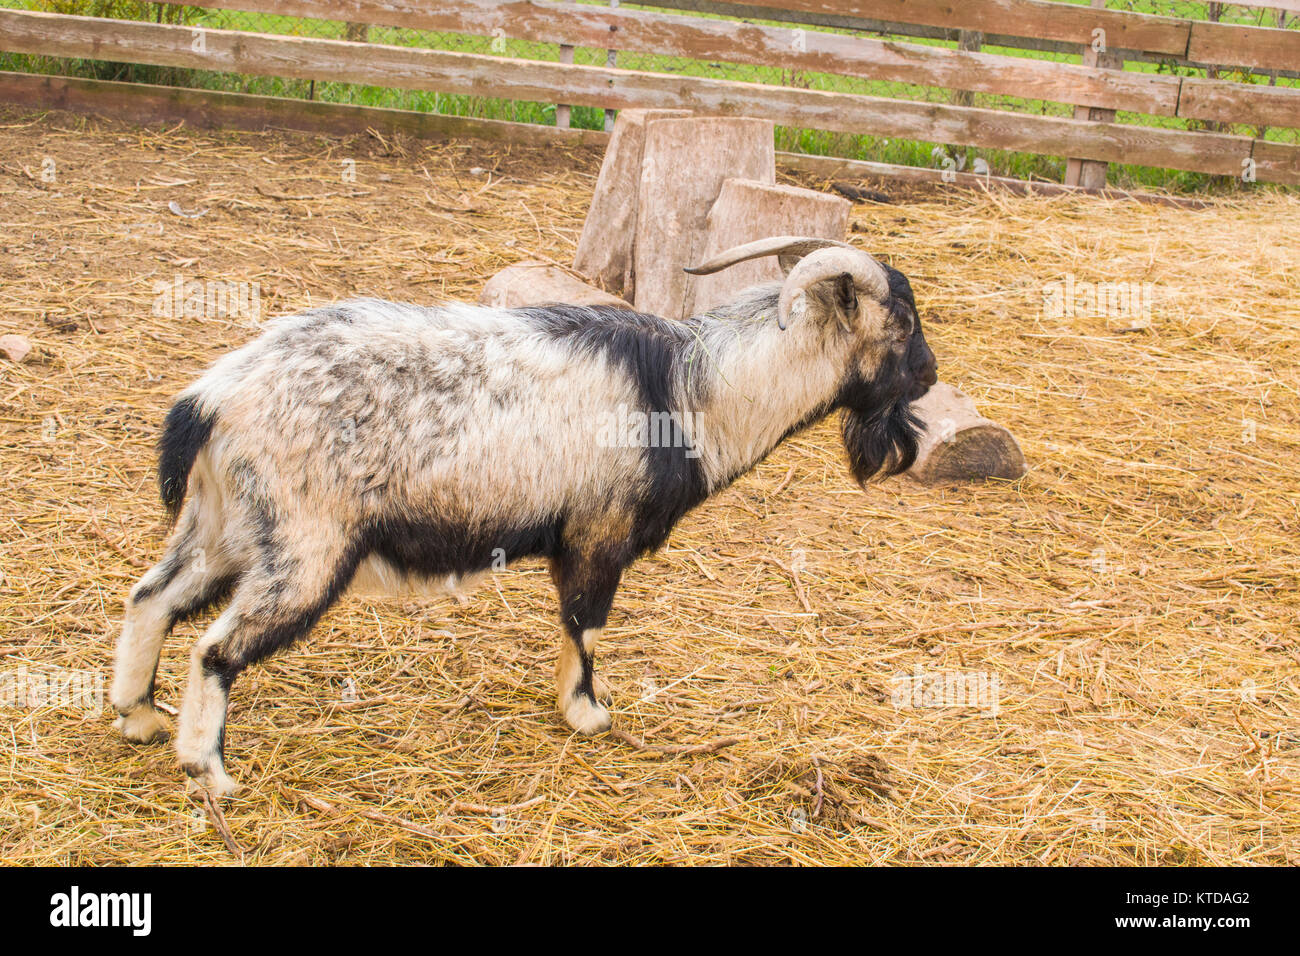 The mountain goat stretched out. The goat is on the farm Stock Photo